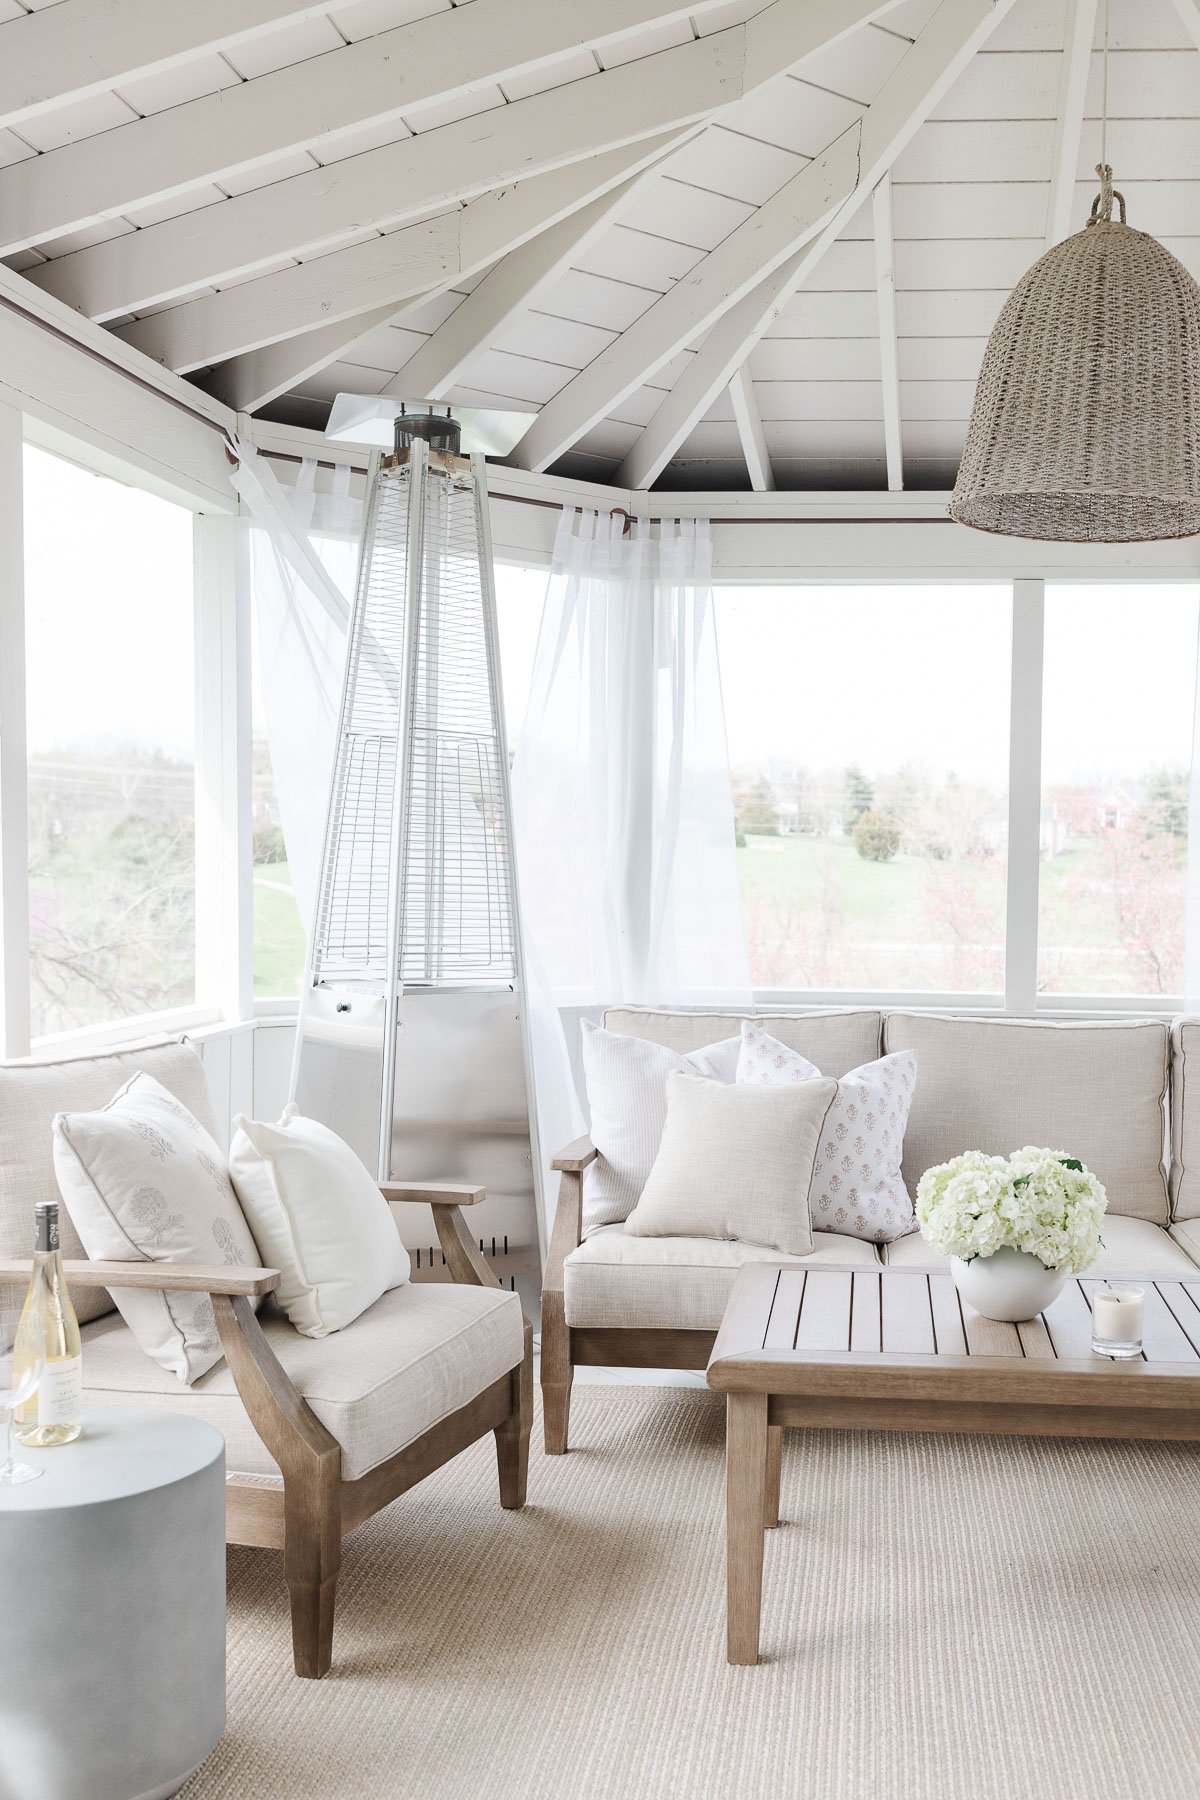 A white screened in porch with a basket pendant light and white furniture.